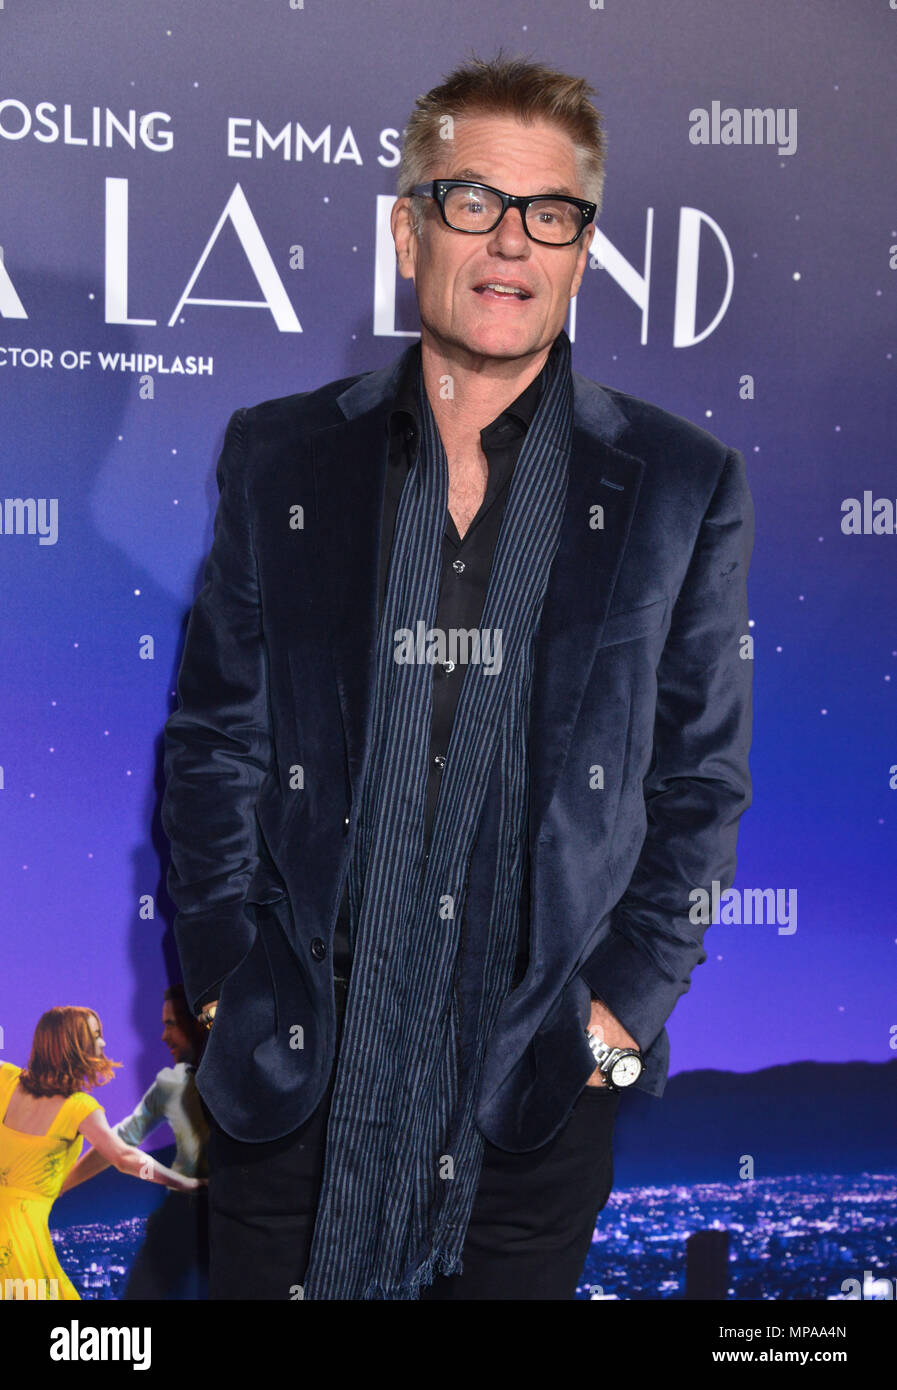 Harry Hamlin  at the La La Land premiere at the Westwood Village in Los Angeles. December 6th 2016.Harry Hamlin  ------------- Red Carpet Event, Vertical, USA, Film Industry, Celebrities,  Photography, Bestof, Arts Culture and Entertainment, Topix Celebrities fashion /  Vertical, Best of, Event in Hollywood Life - California,  Red Carpet and backstage, USA, Film Industry, Celebrities,  movie celebrities, TV celebrities, Music celebrities, Photography, Bestof, Arts Culture and Entertainment,  Topix, Three Quarters, vertical, one person,, from the year , 2016, inquiry tsuni@Gamma-USA.com Stock Photo